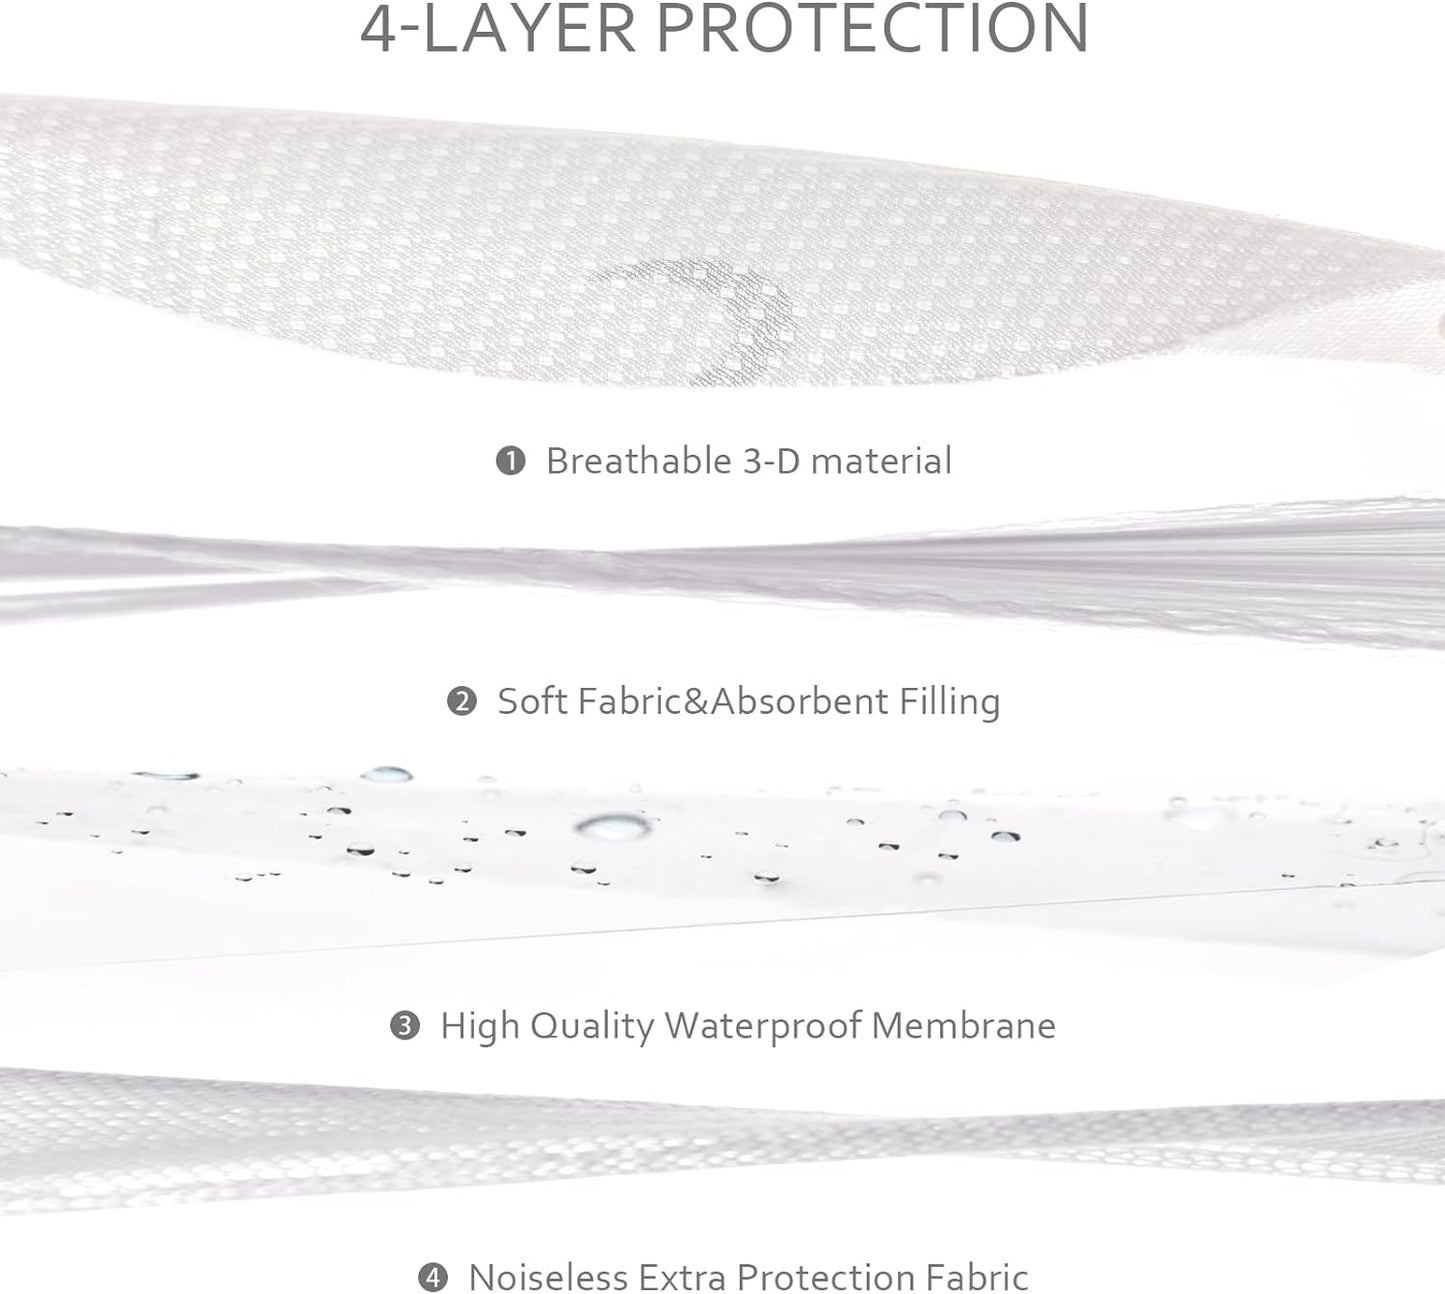 Pack N Play Mattress Pad Cover/ Protector - 3D Mesh, Waterproof, White (for Guava Lotus, Baby Bjorn, Dream on Me Travel Crib Light Playard)